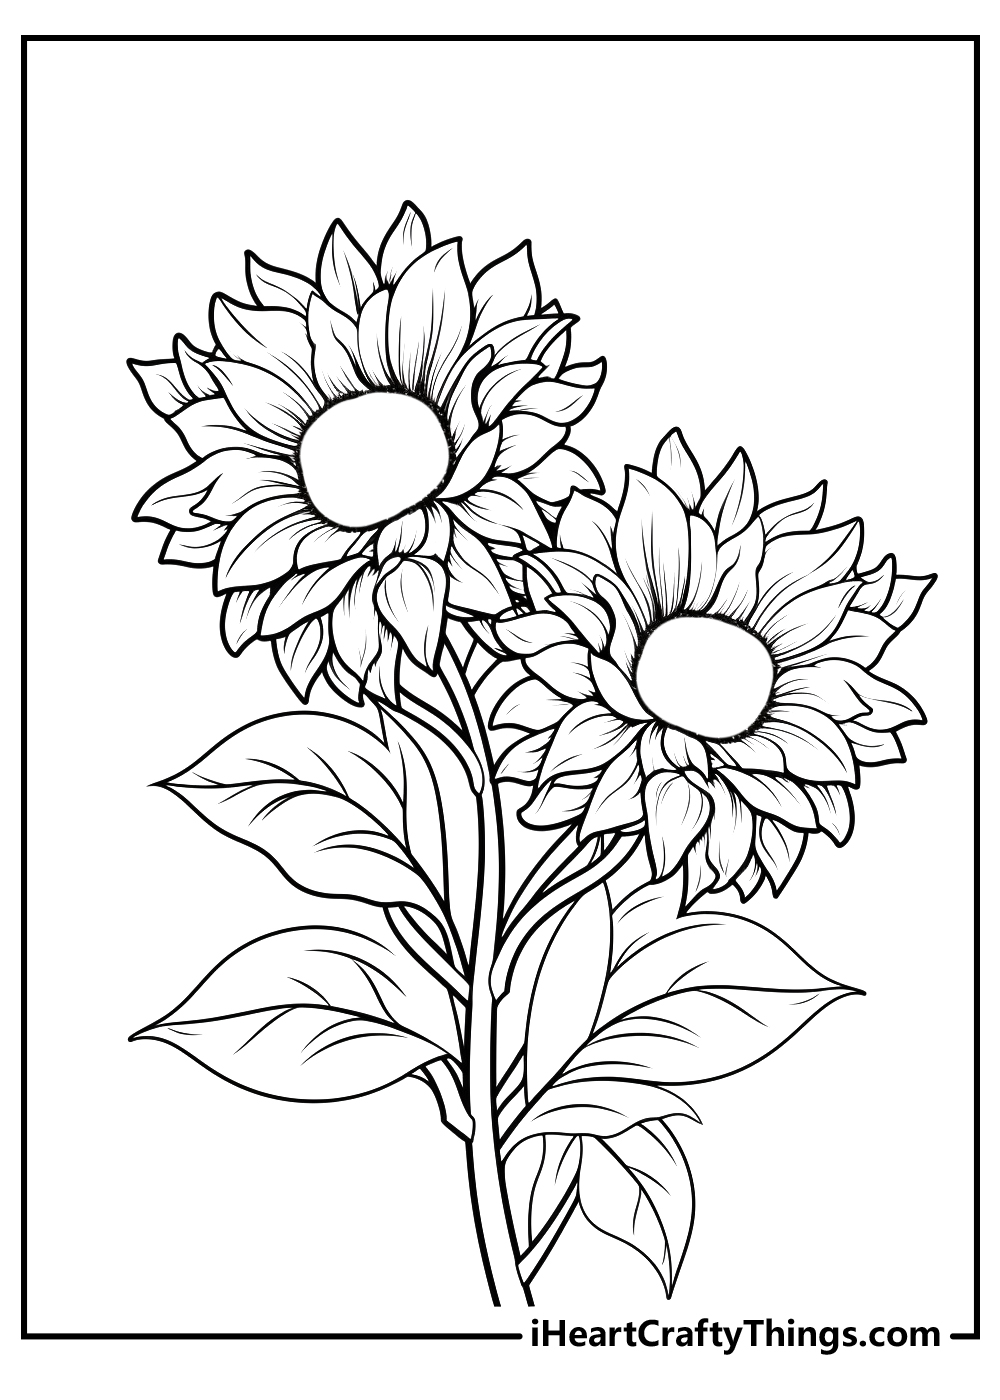 sunflower coloring sheet free download